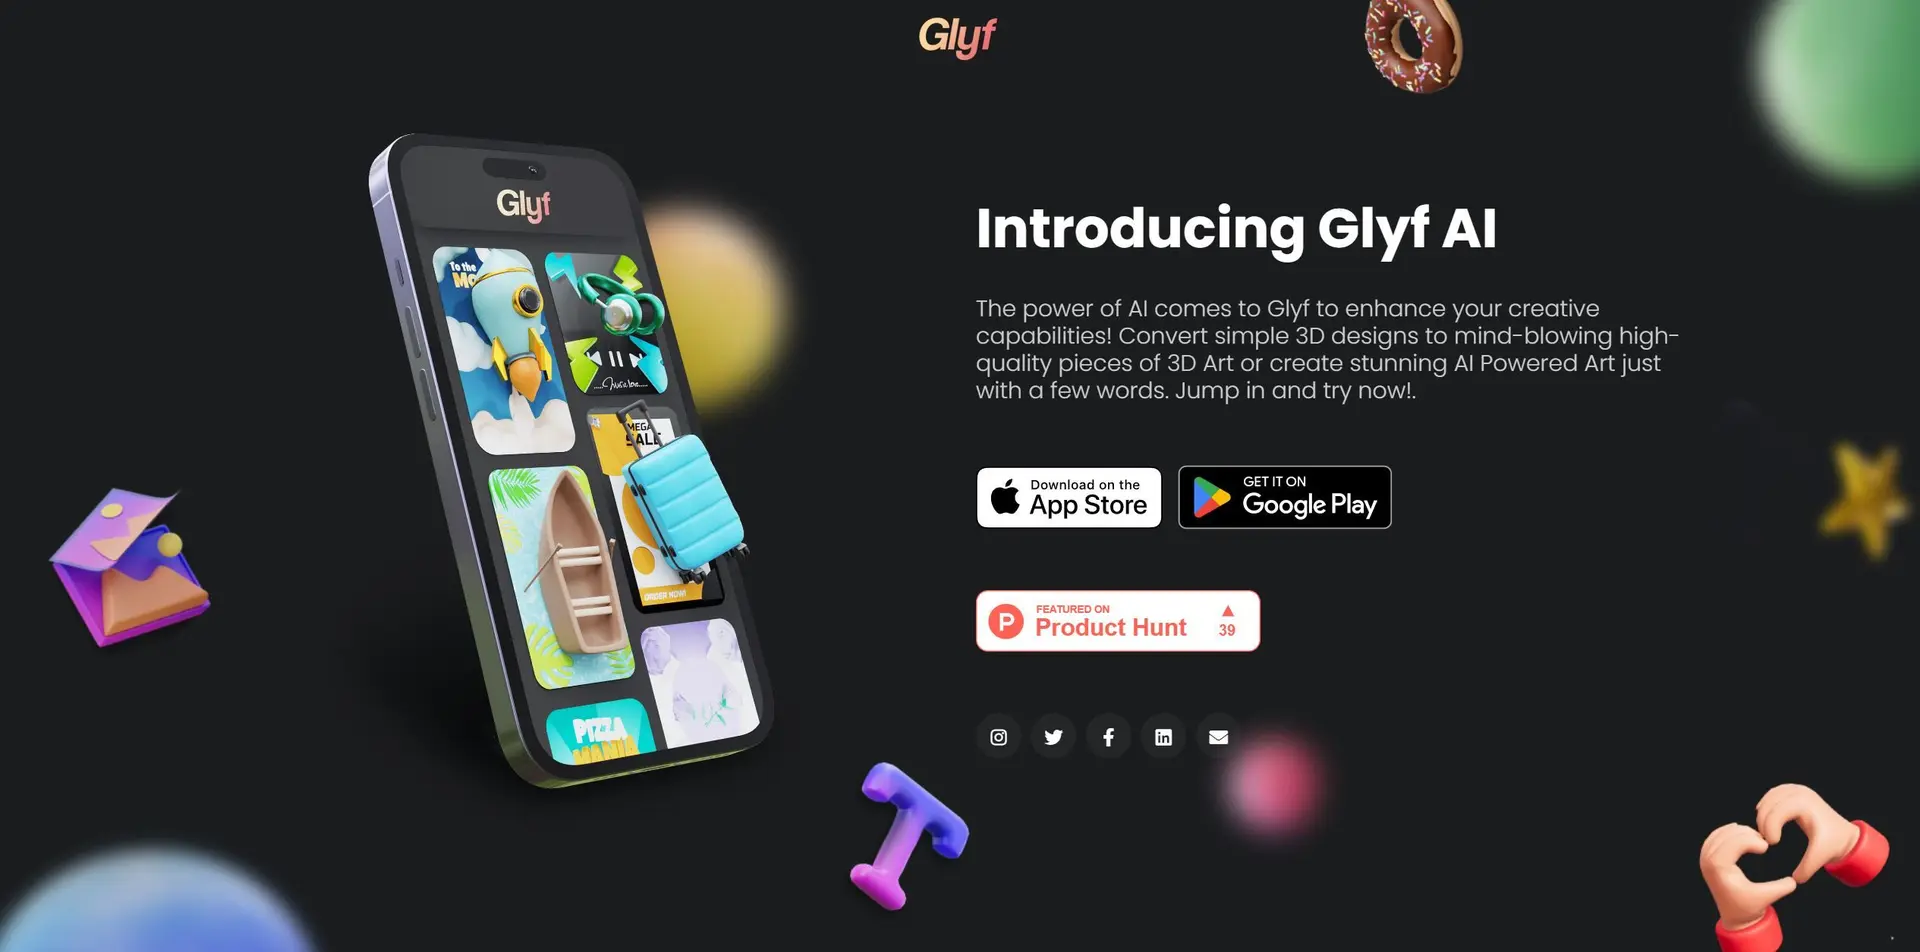 Glyfwebsite picture